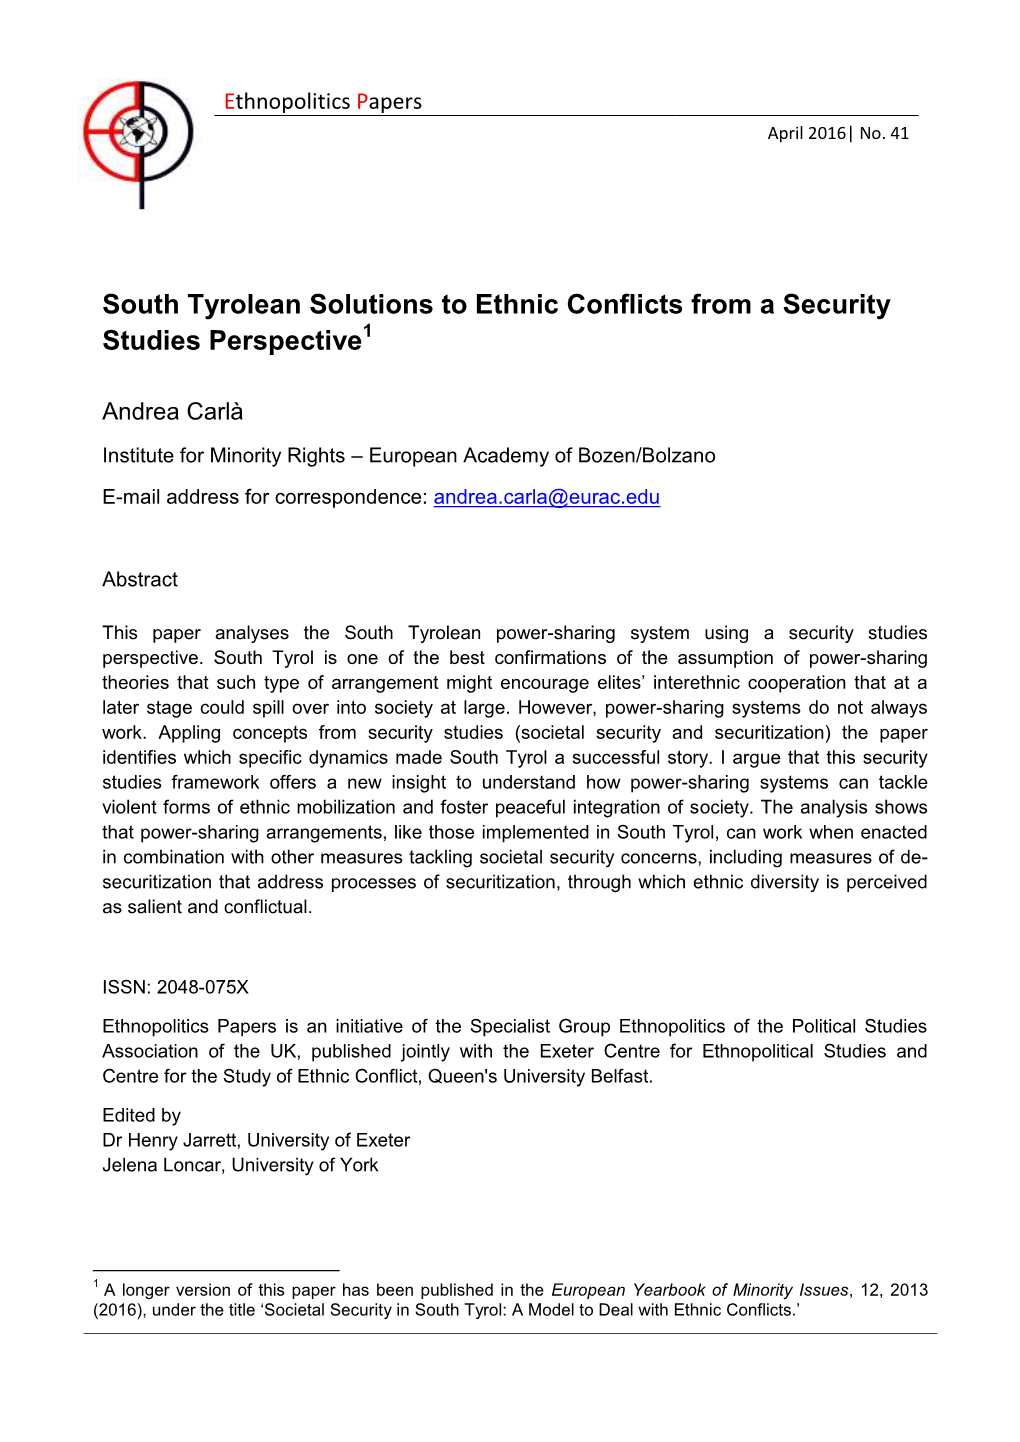 South Tyrolean Solutions to Ethnic Conflicts from a Security Studies Perspective1